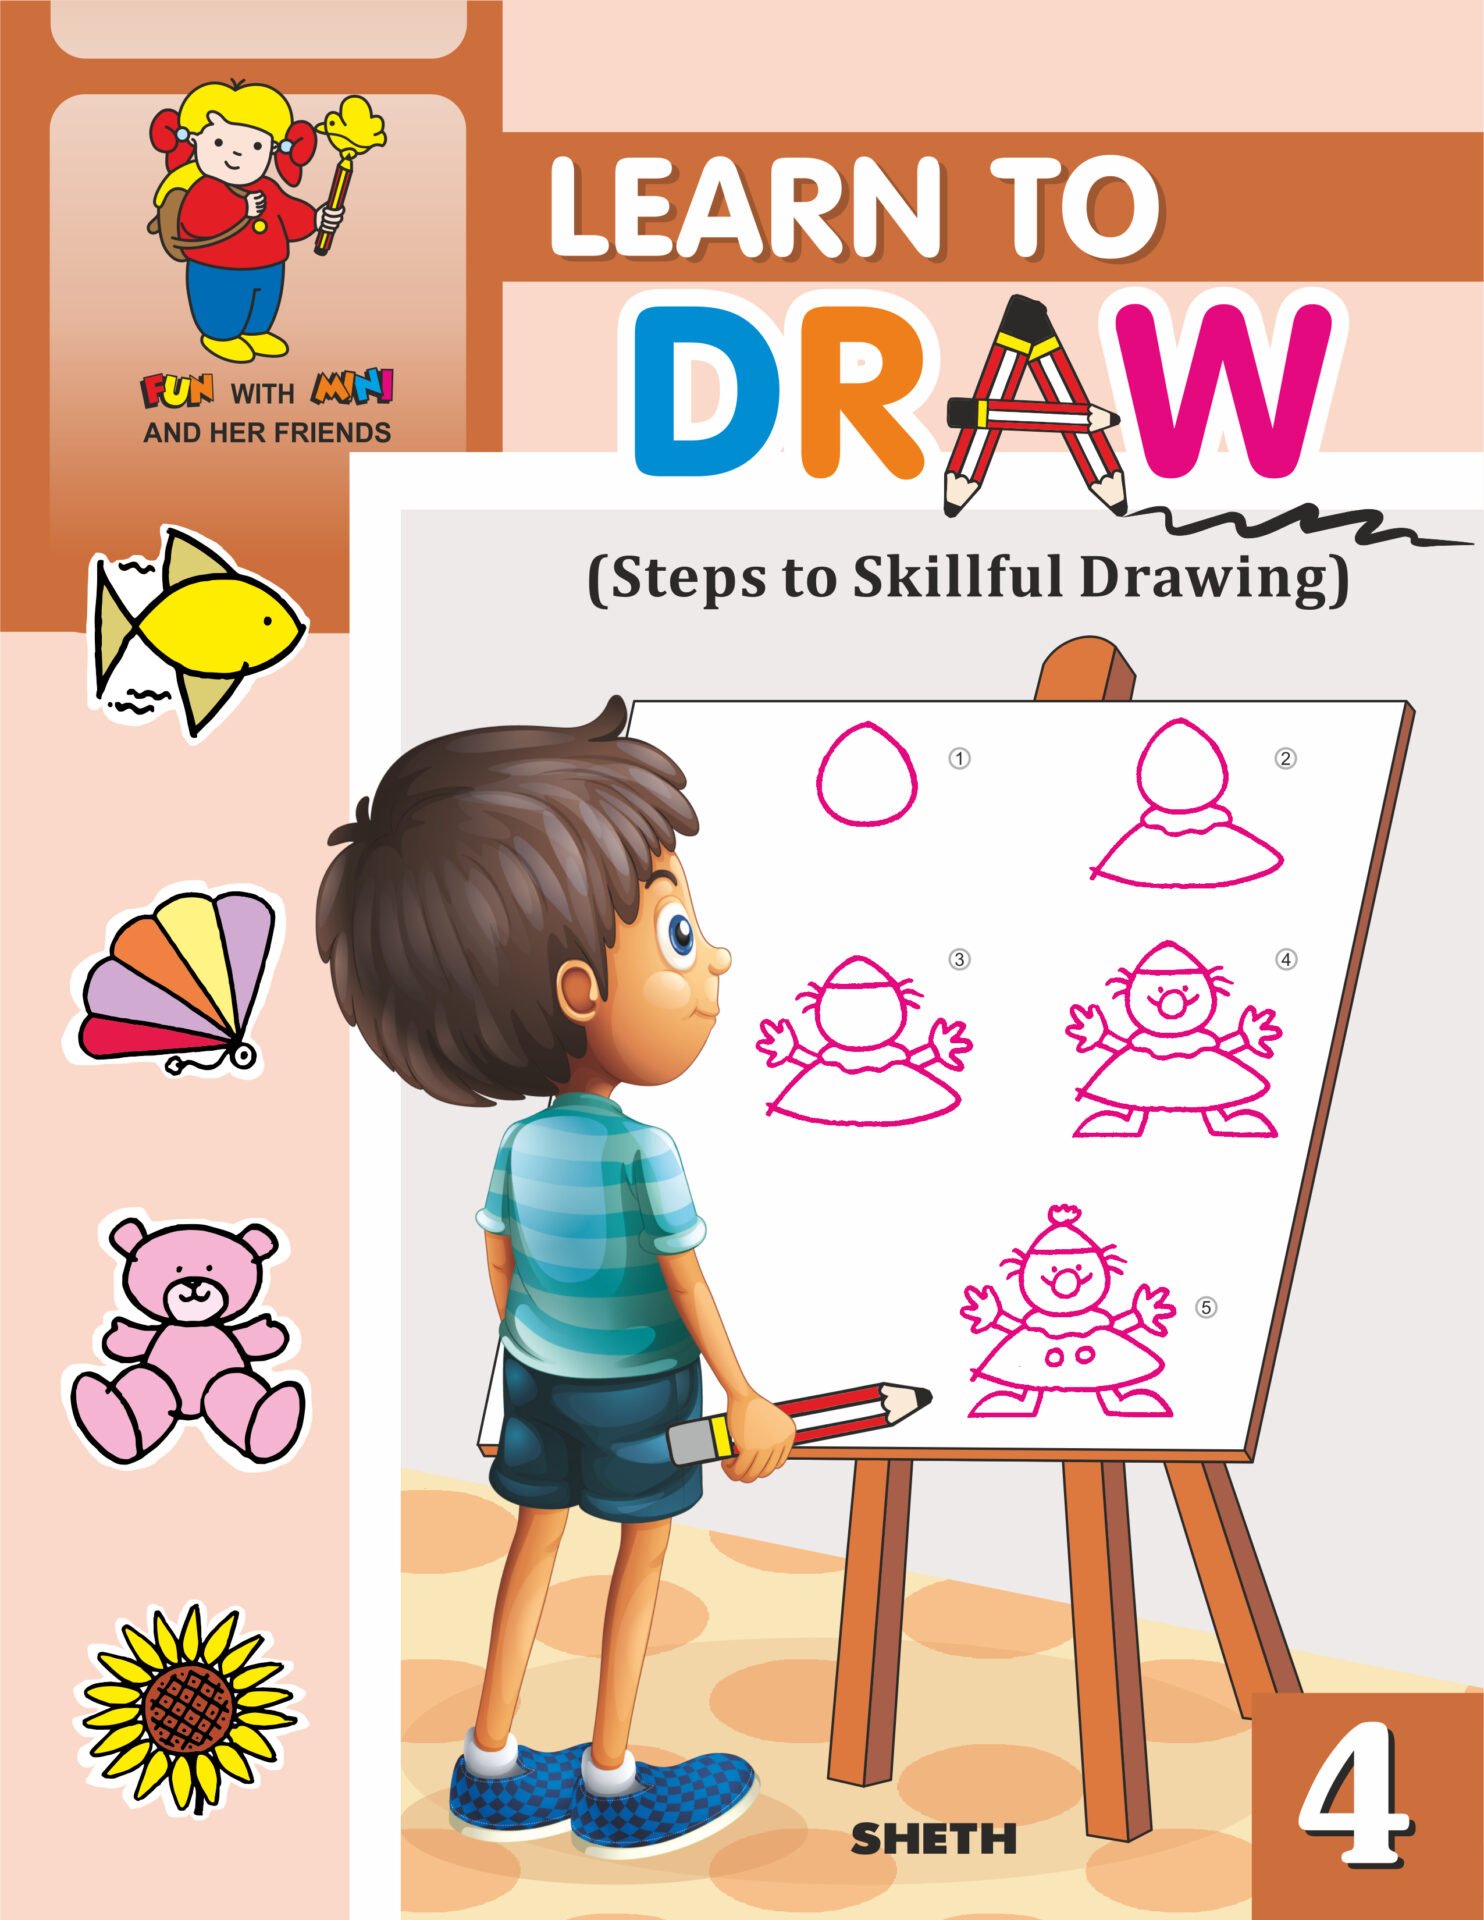 How to Draw a Cute Cup - Drawing and Coloring Page | Mimy.org